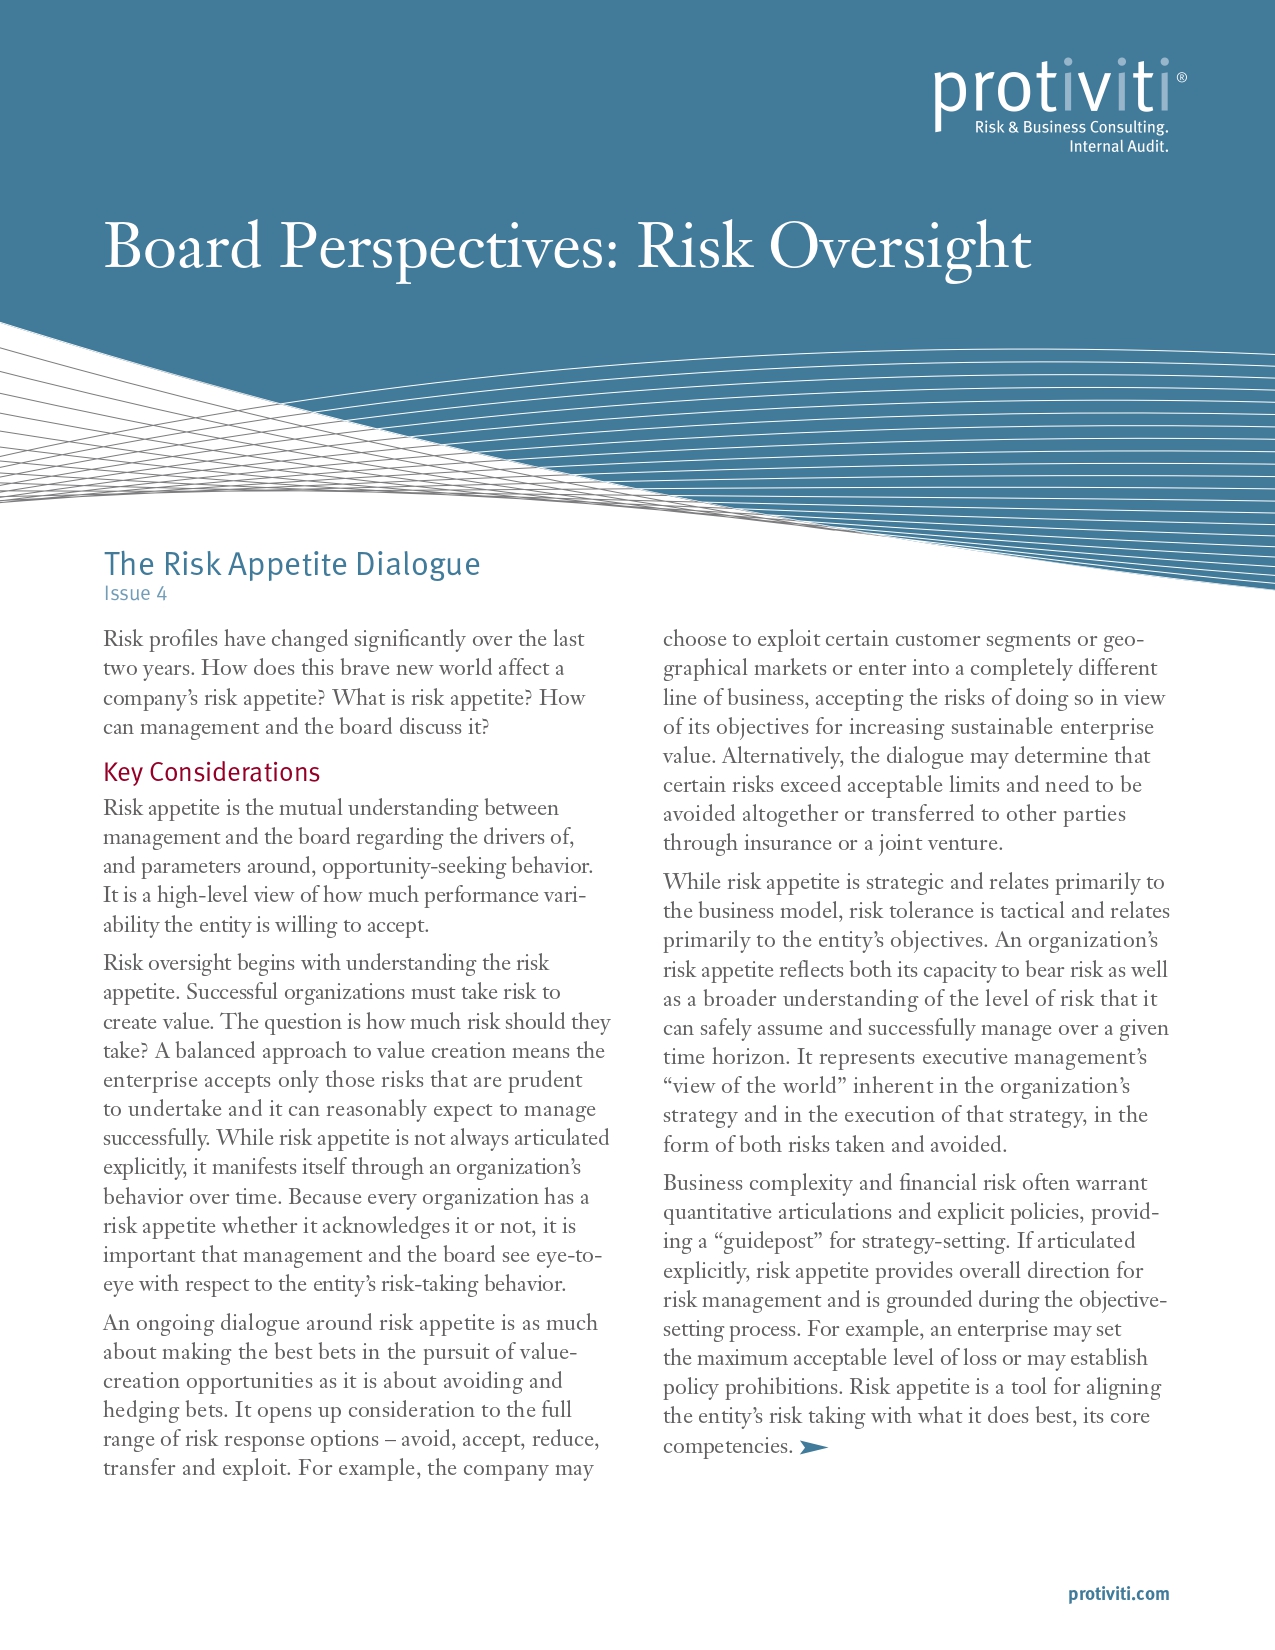 Screenshot of the first page of The Risk Appetite Dialogue